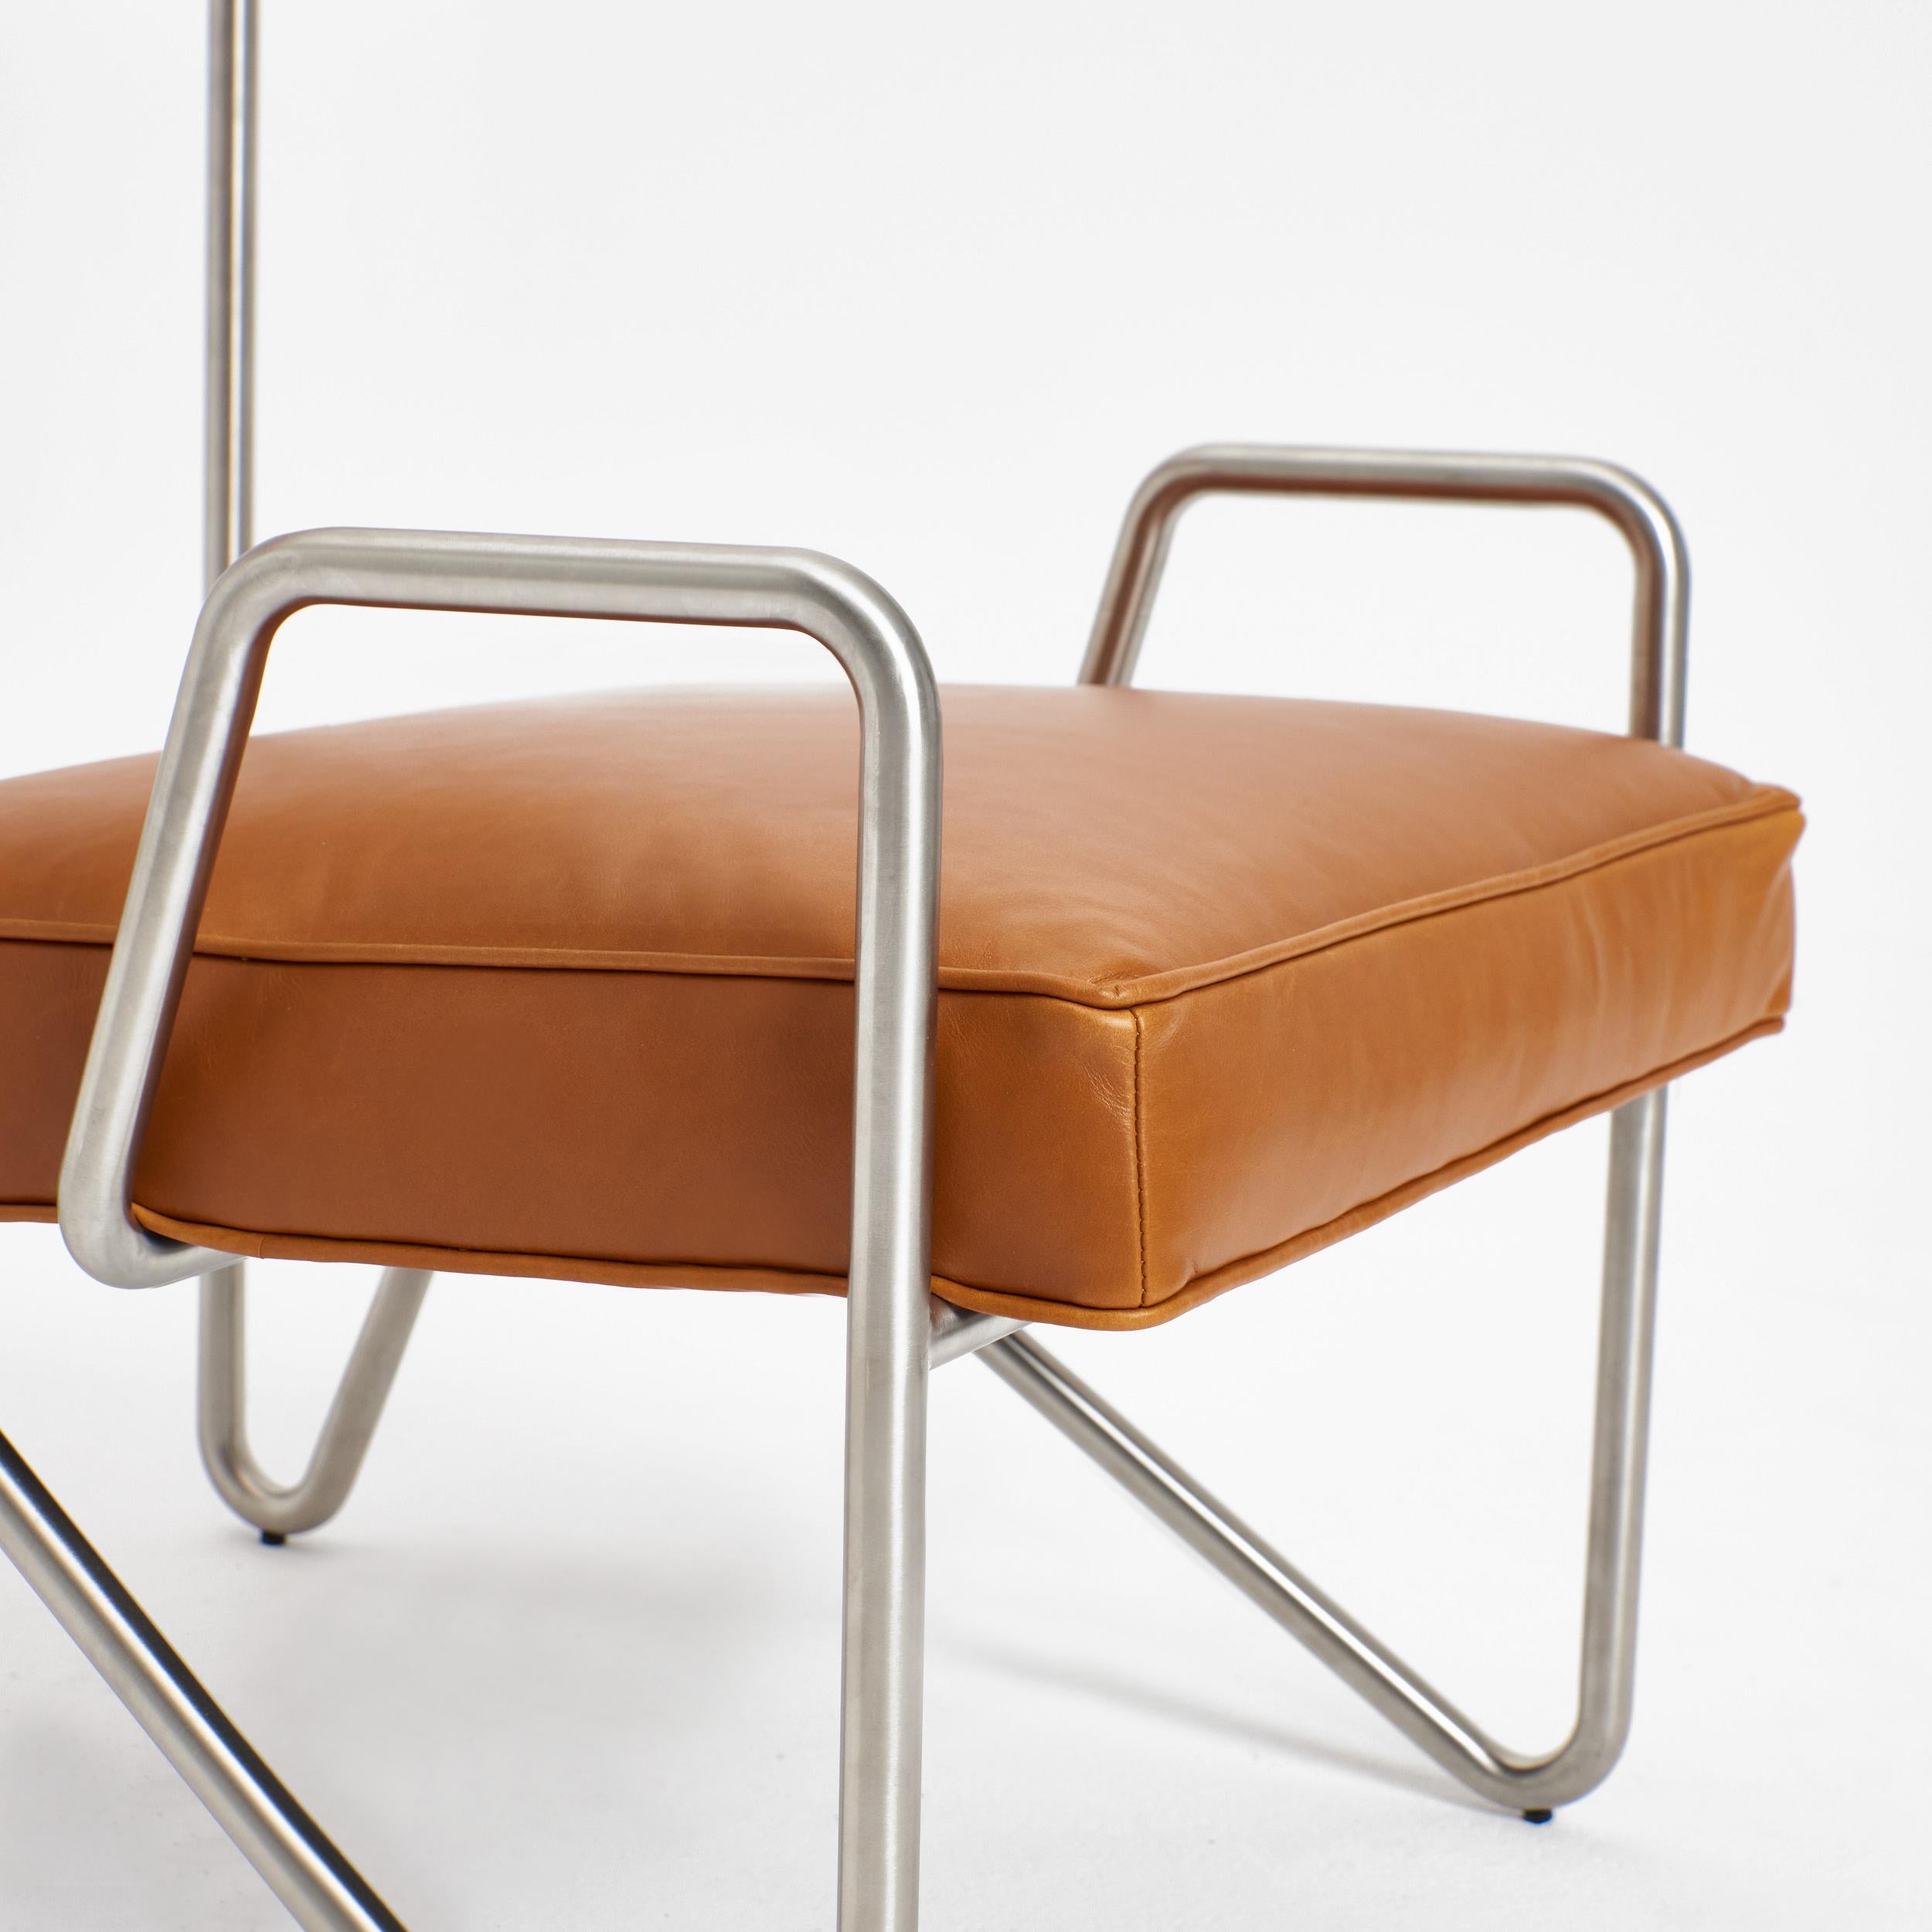 Modern Larry's Lounge Chair in Tan Leather